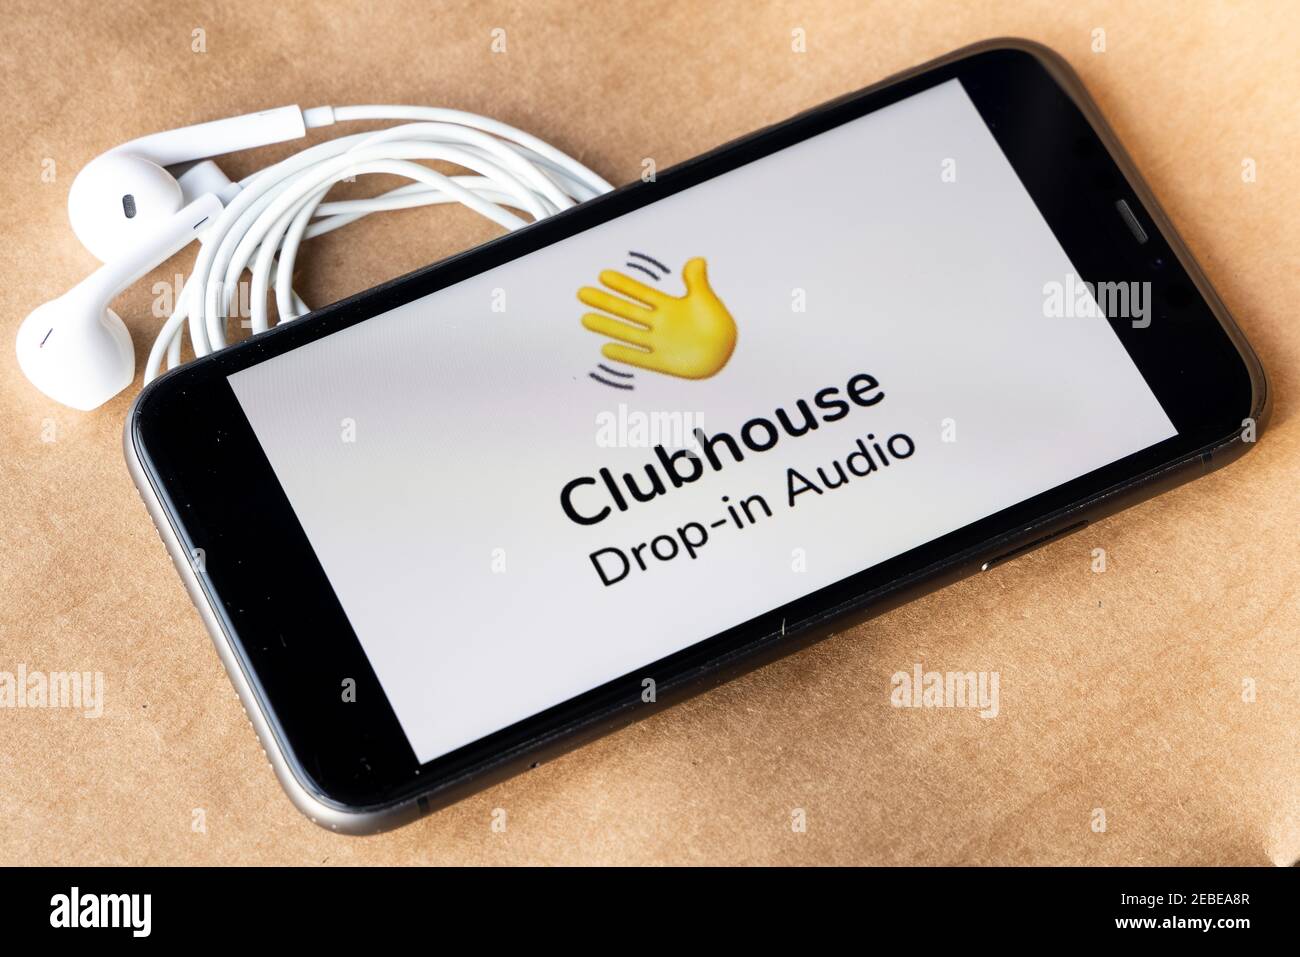 Clubhouse application view on the smartphone, controversy 2021 that hides behind the Social app. Clubhouse drop in audio chat application view Stock Photo